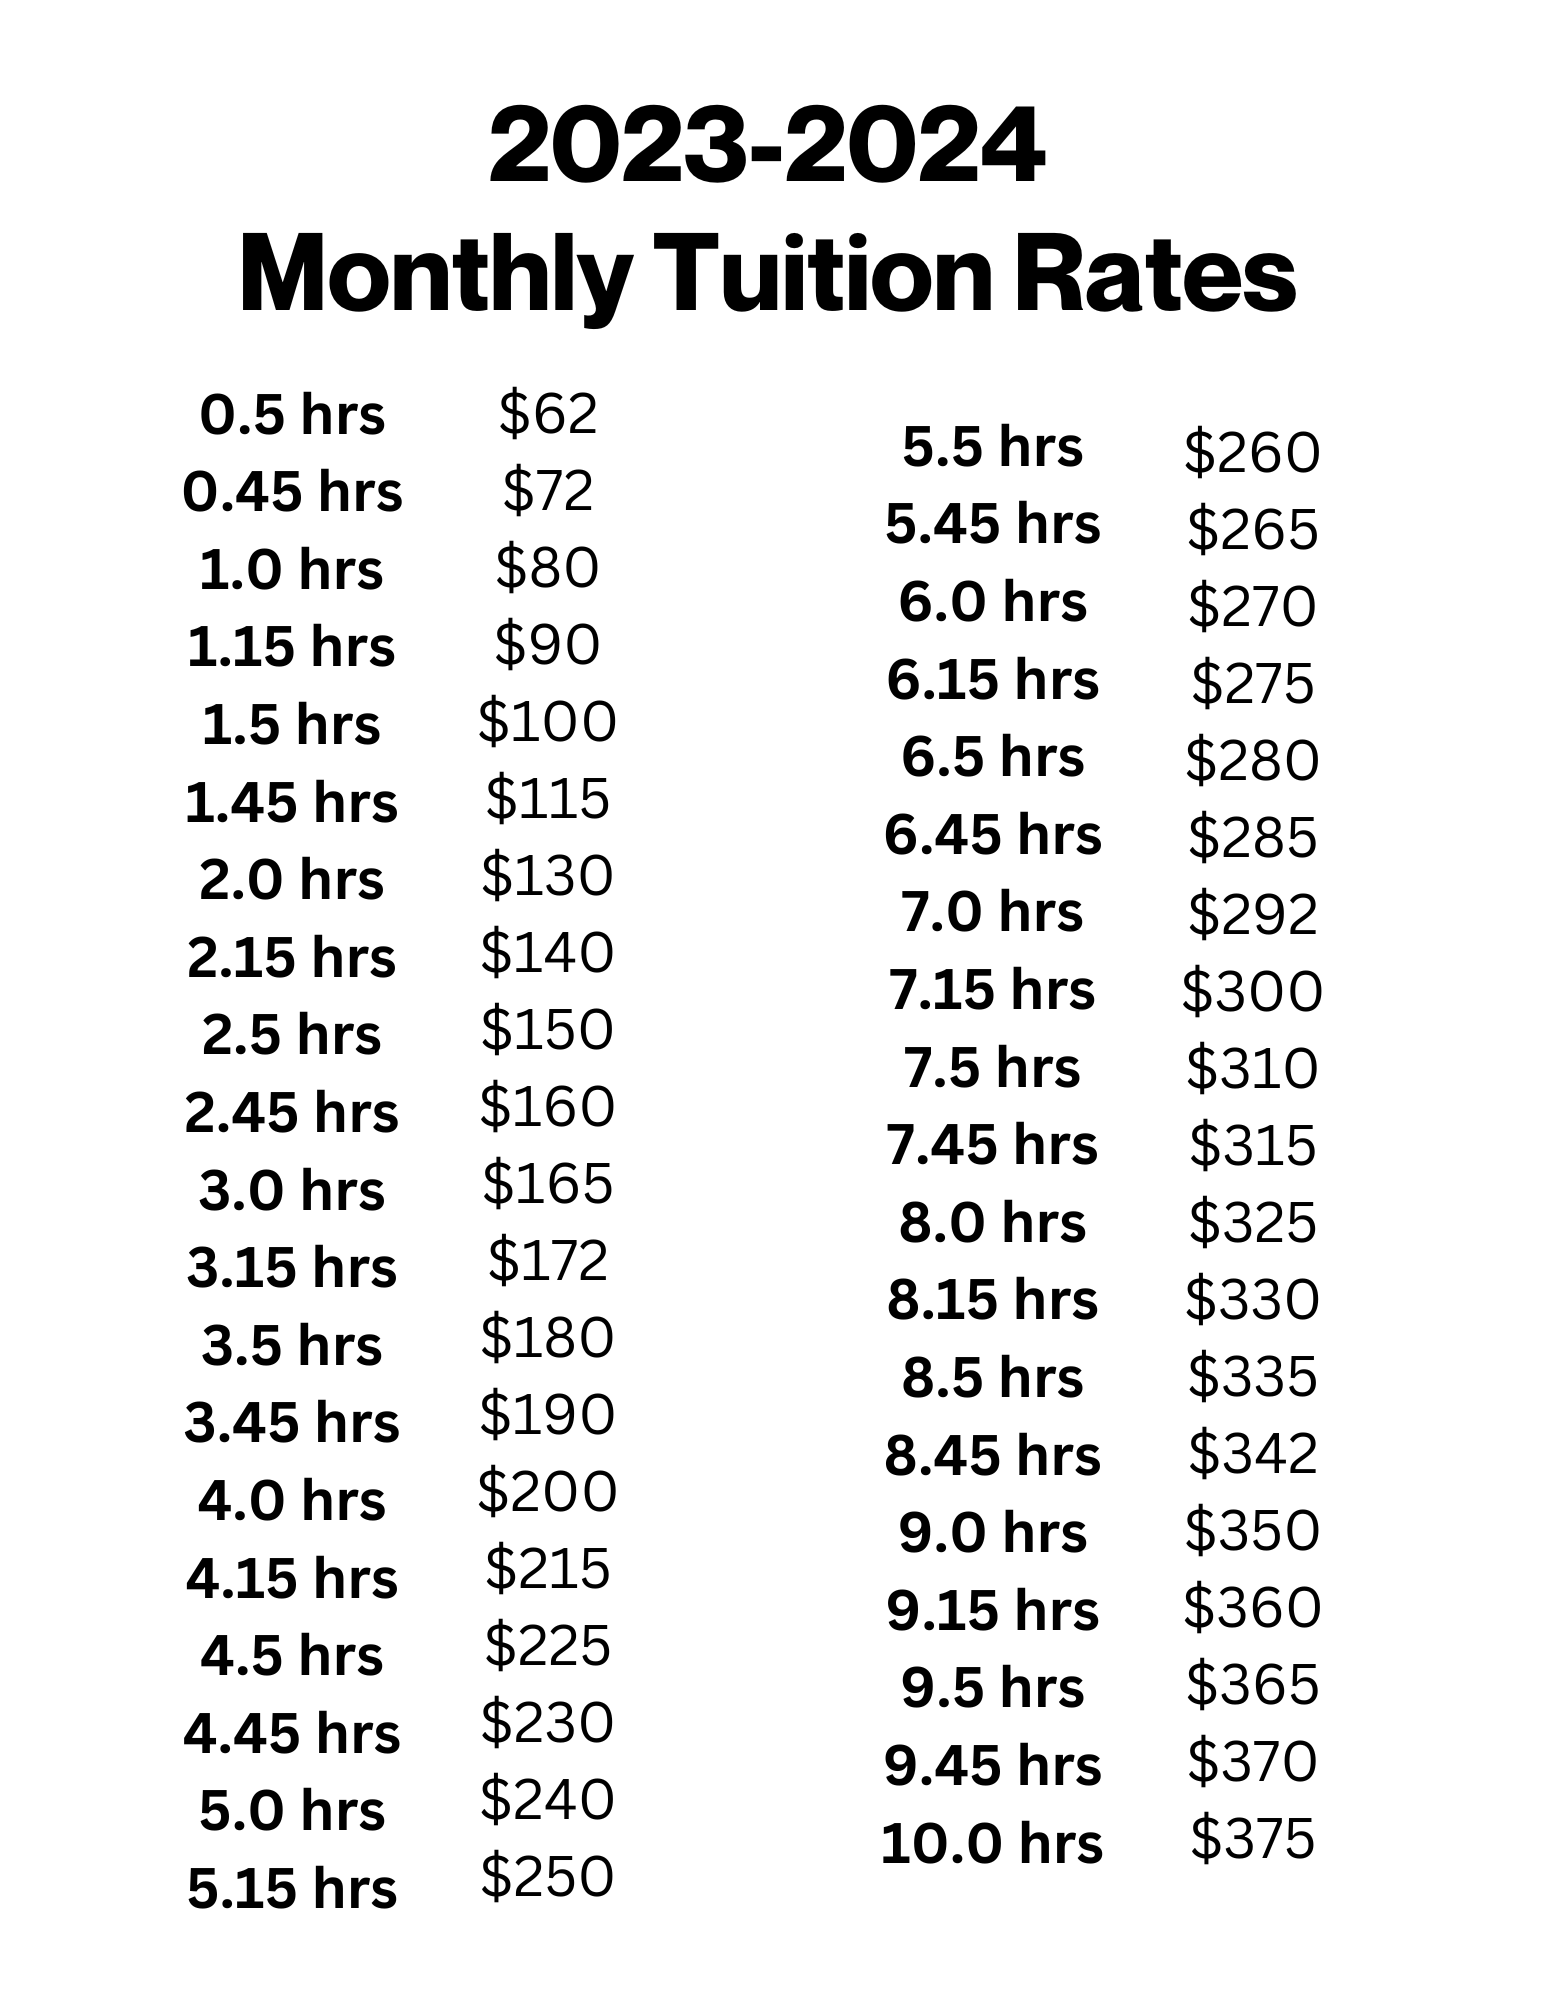 Monthly tuition rates